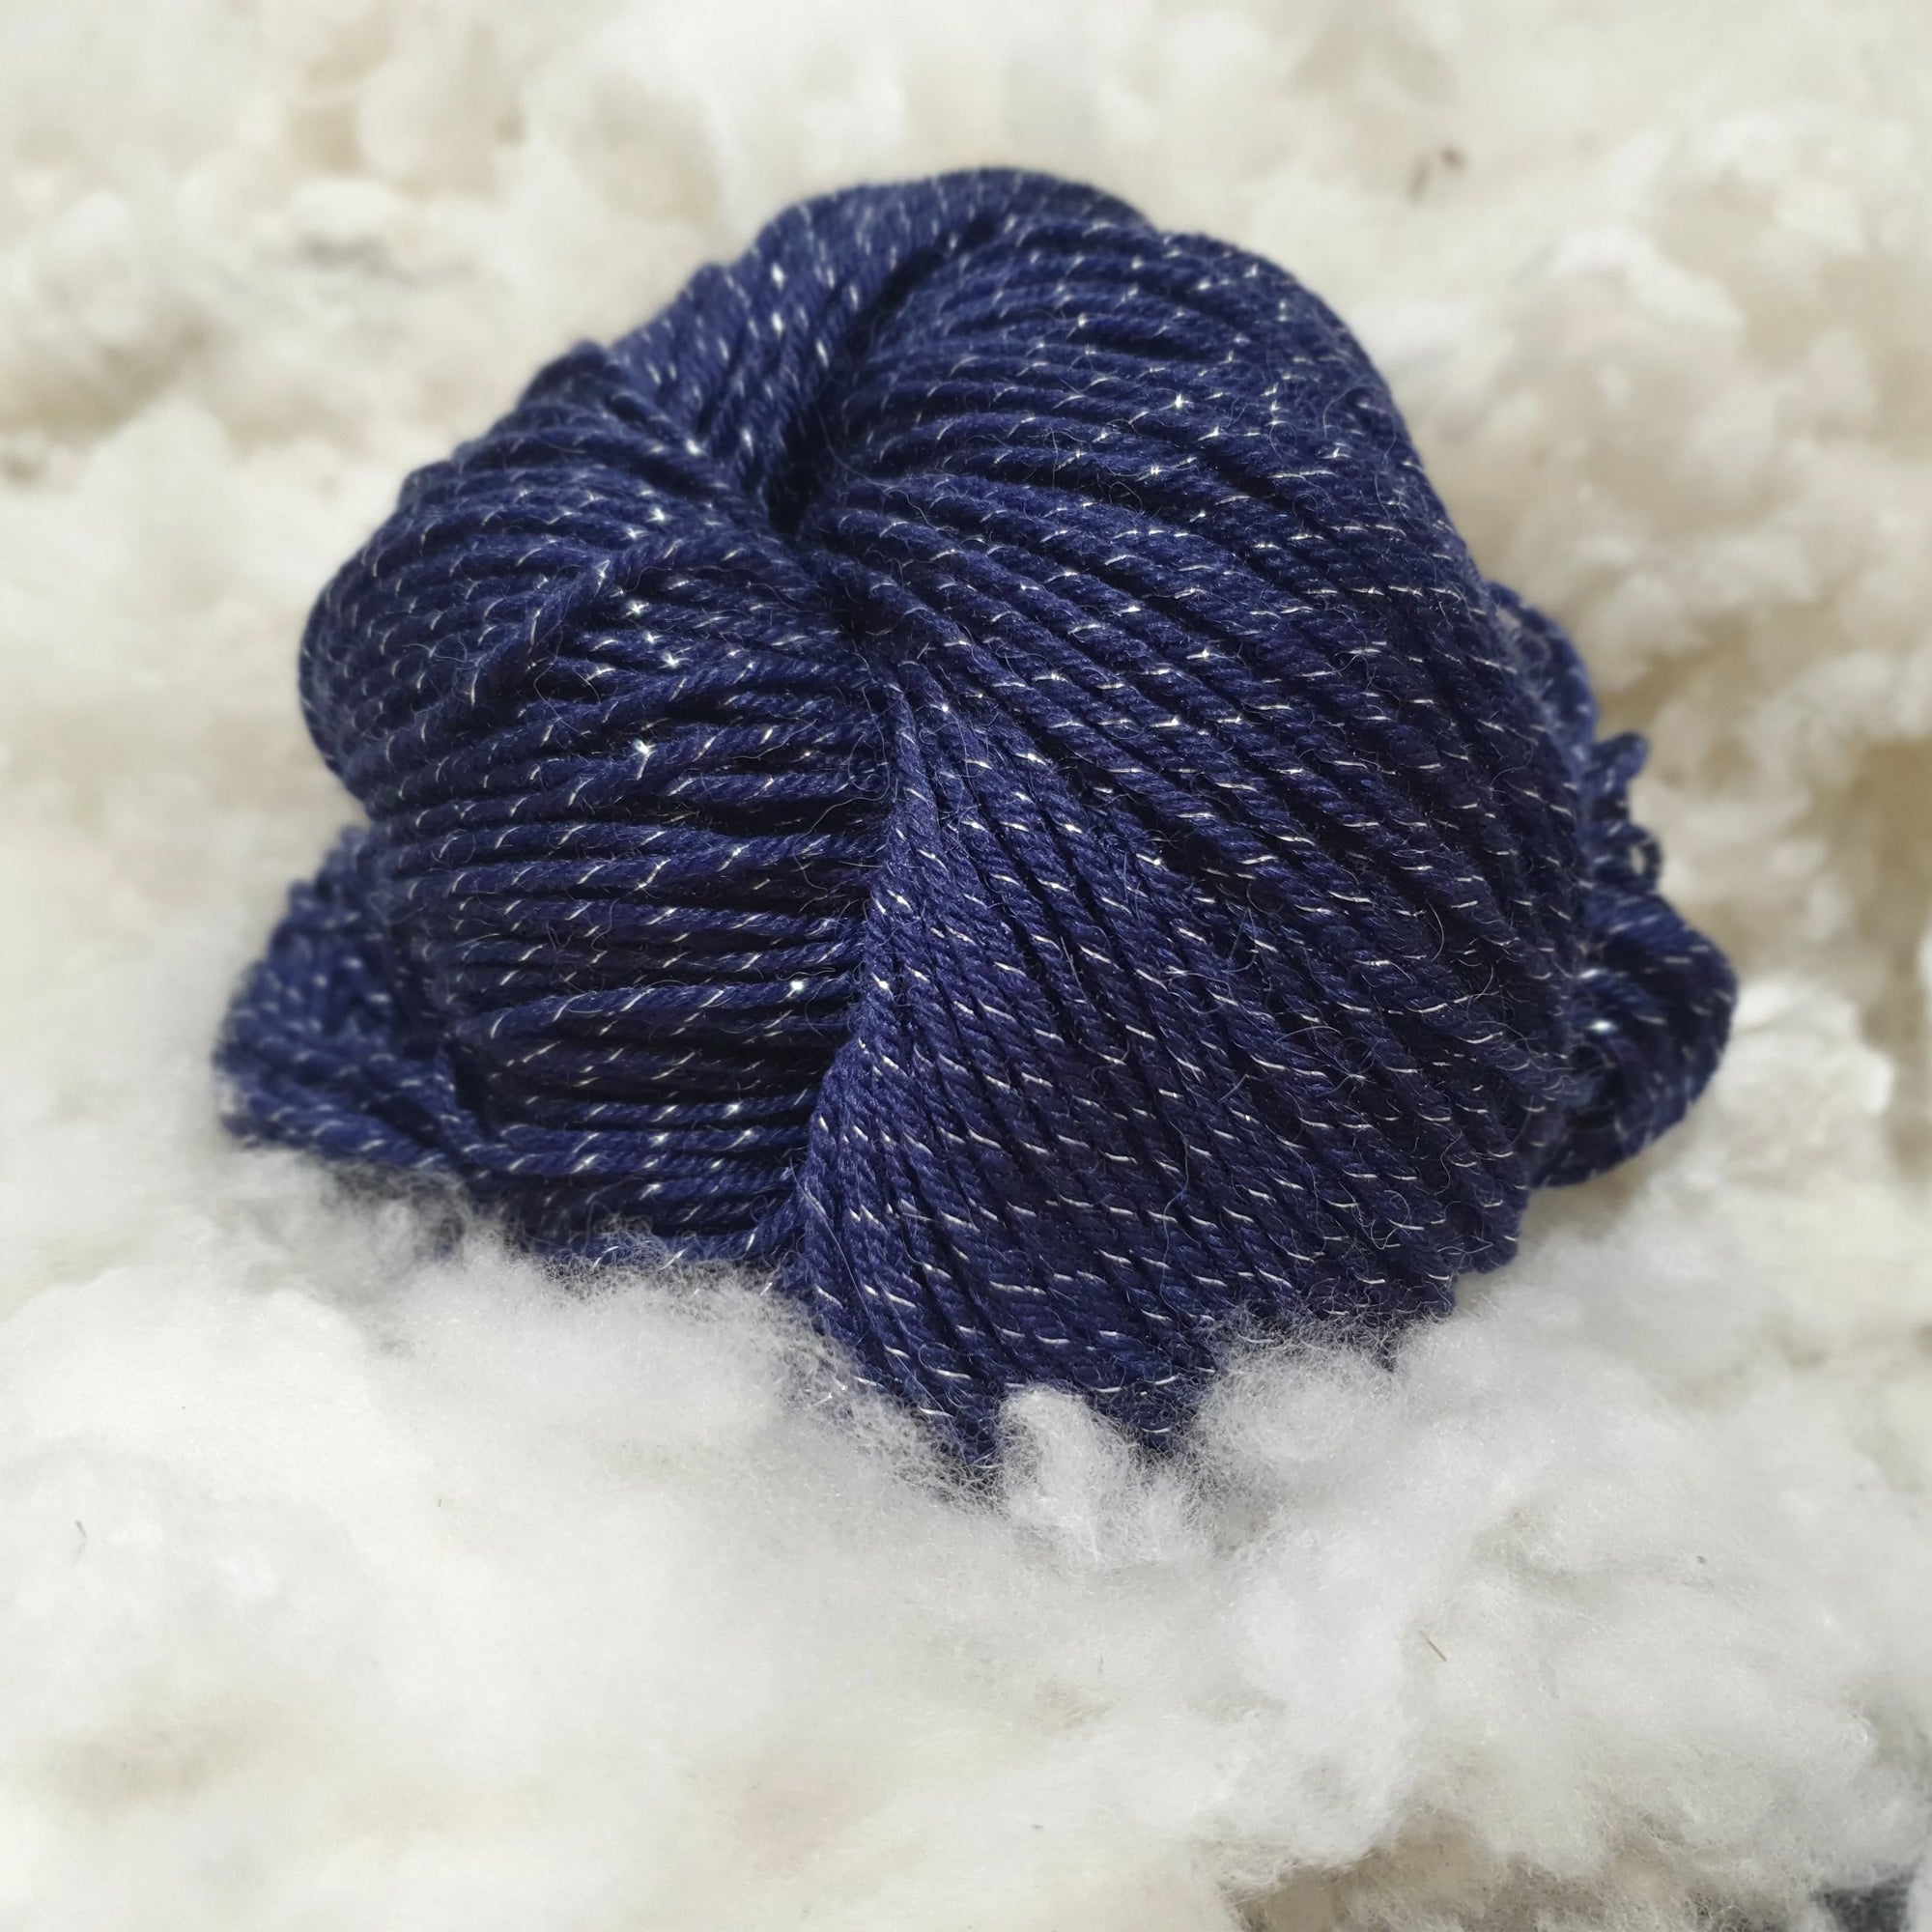 Nundle Dyed Metallica Yarn 8ply Equivalent midnight